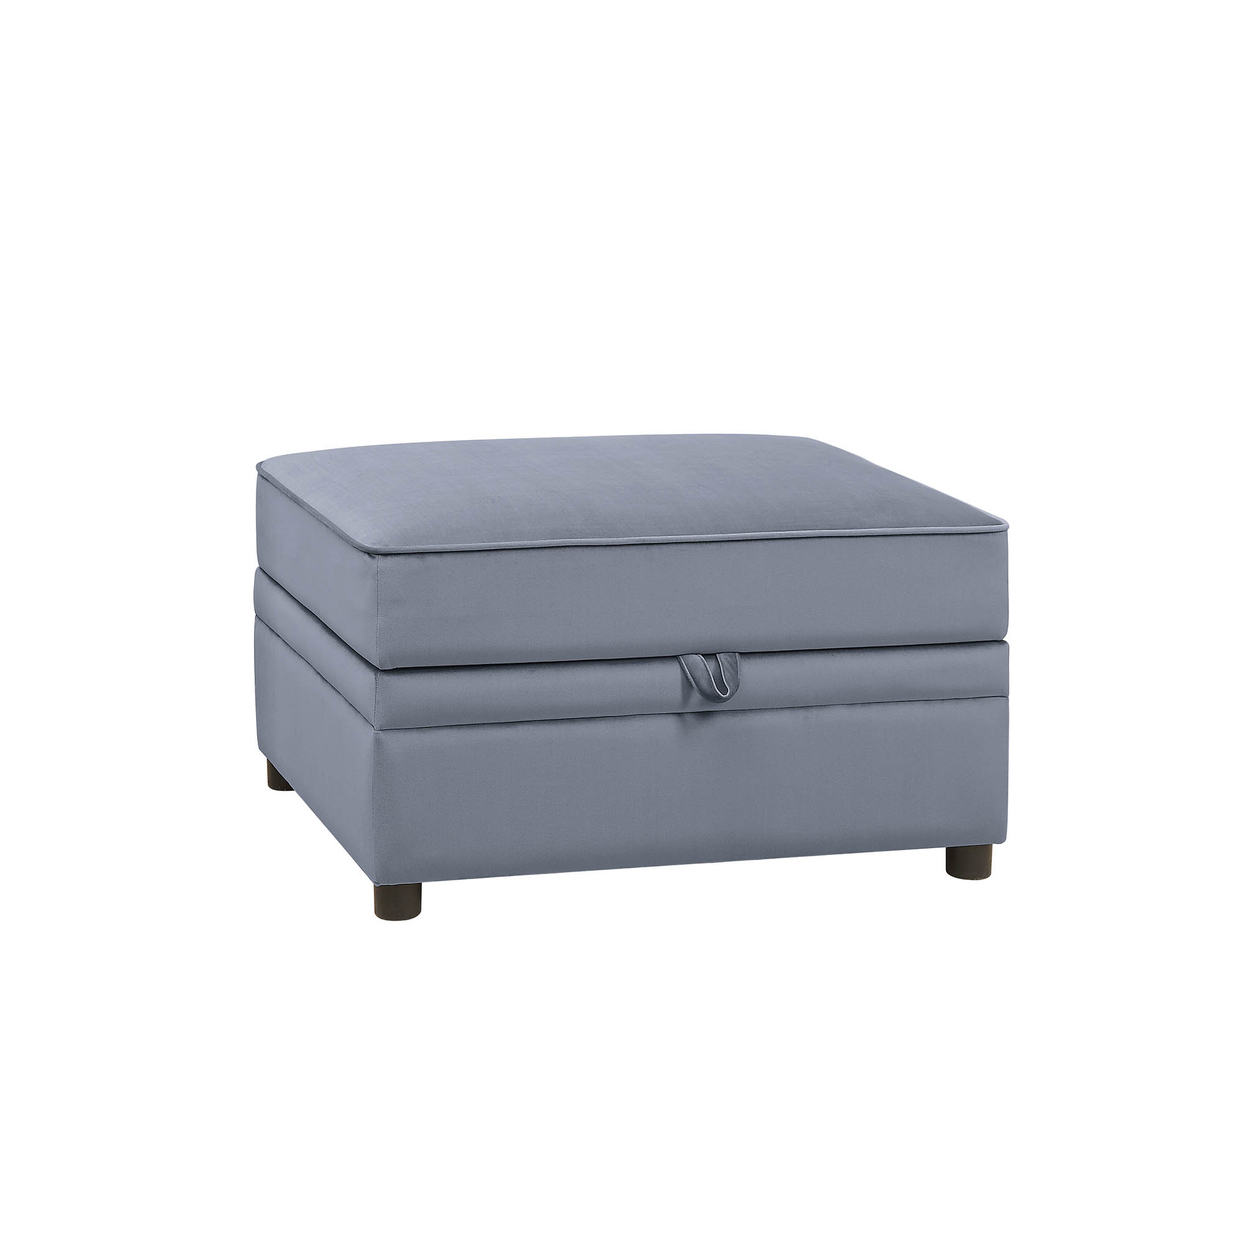 Fabric Upholstered Wooden Ottoman With Lift Top Storage, Gray- Saltoro Sherpi